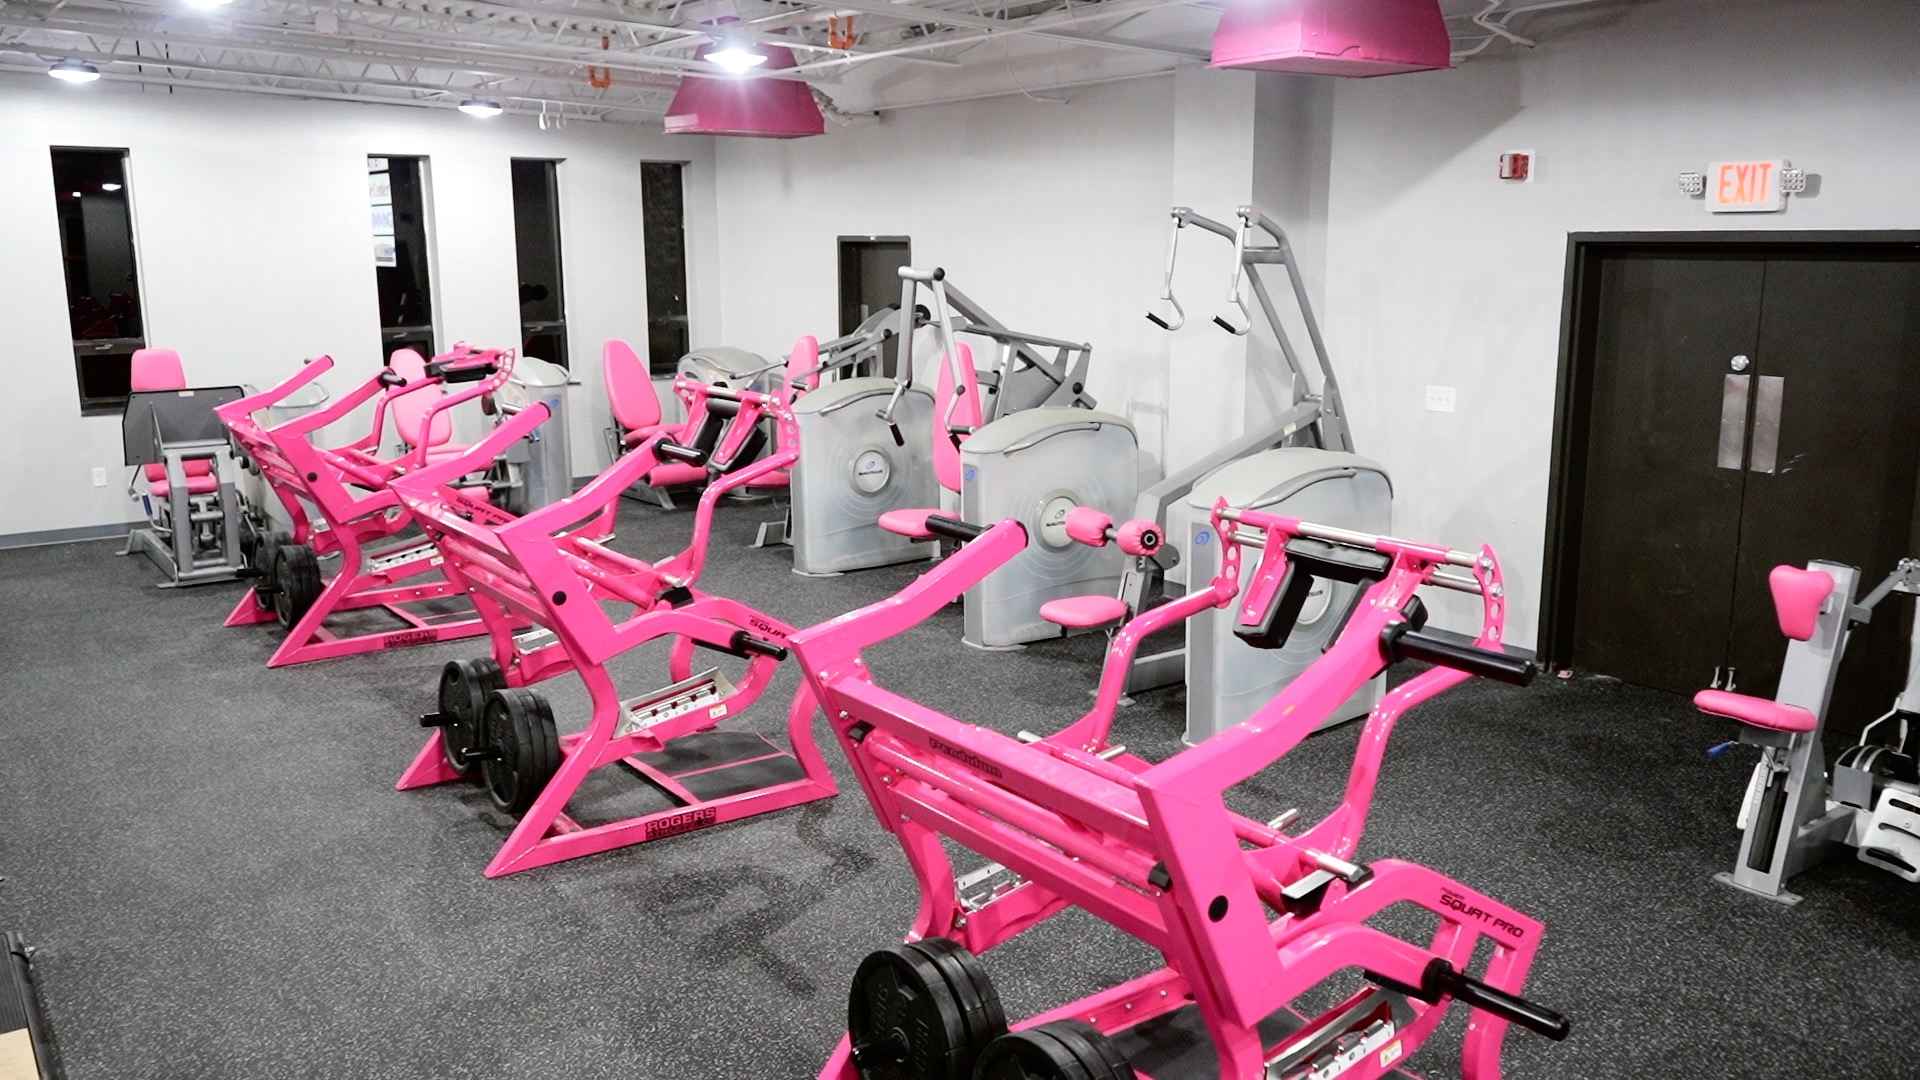 Pink Background Of Gym Fitness Club Backgrounds